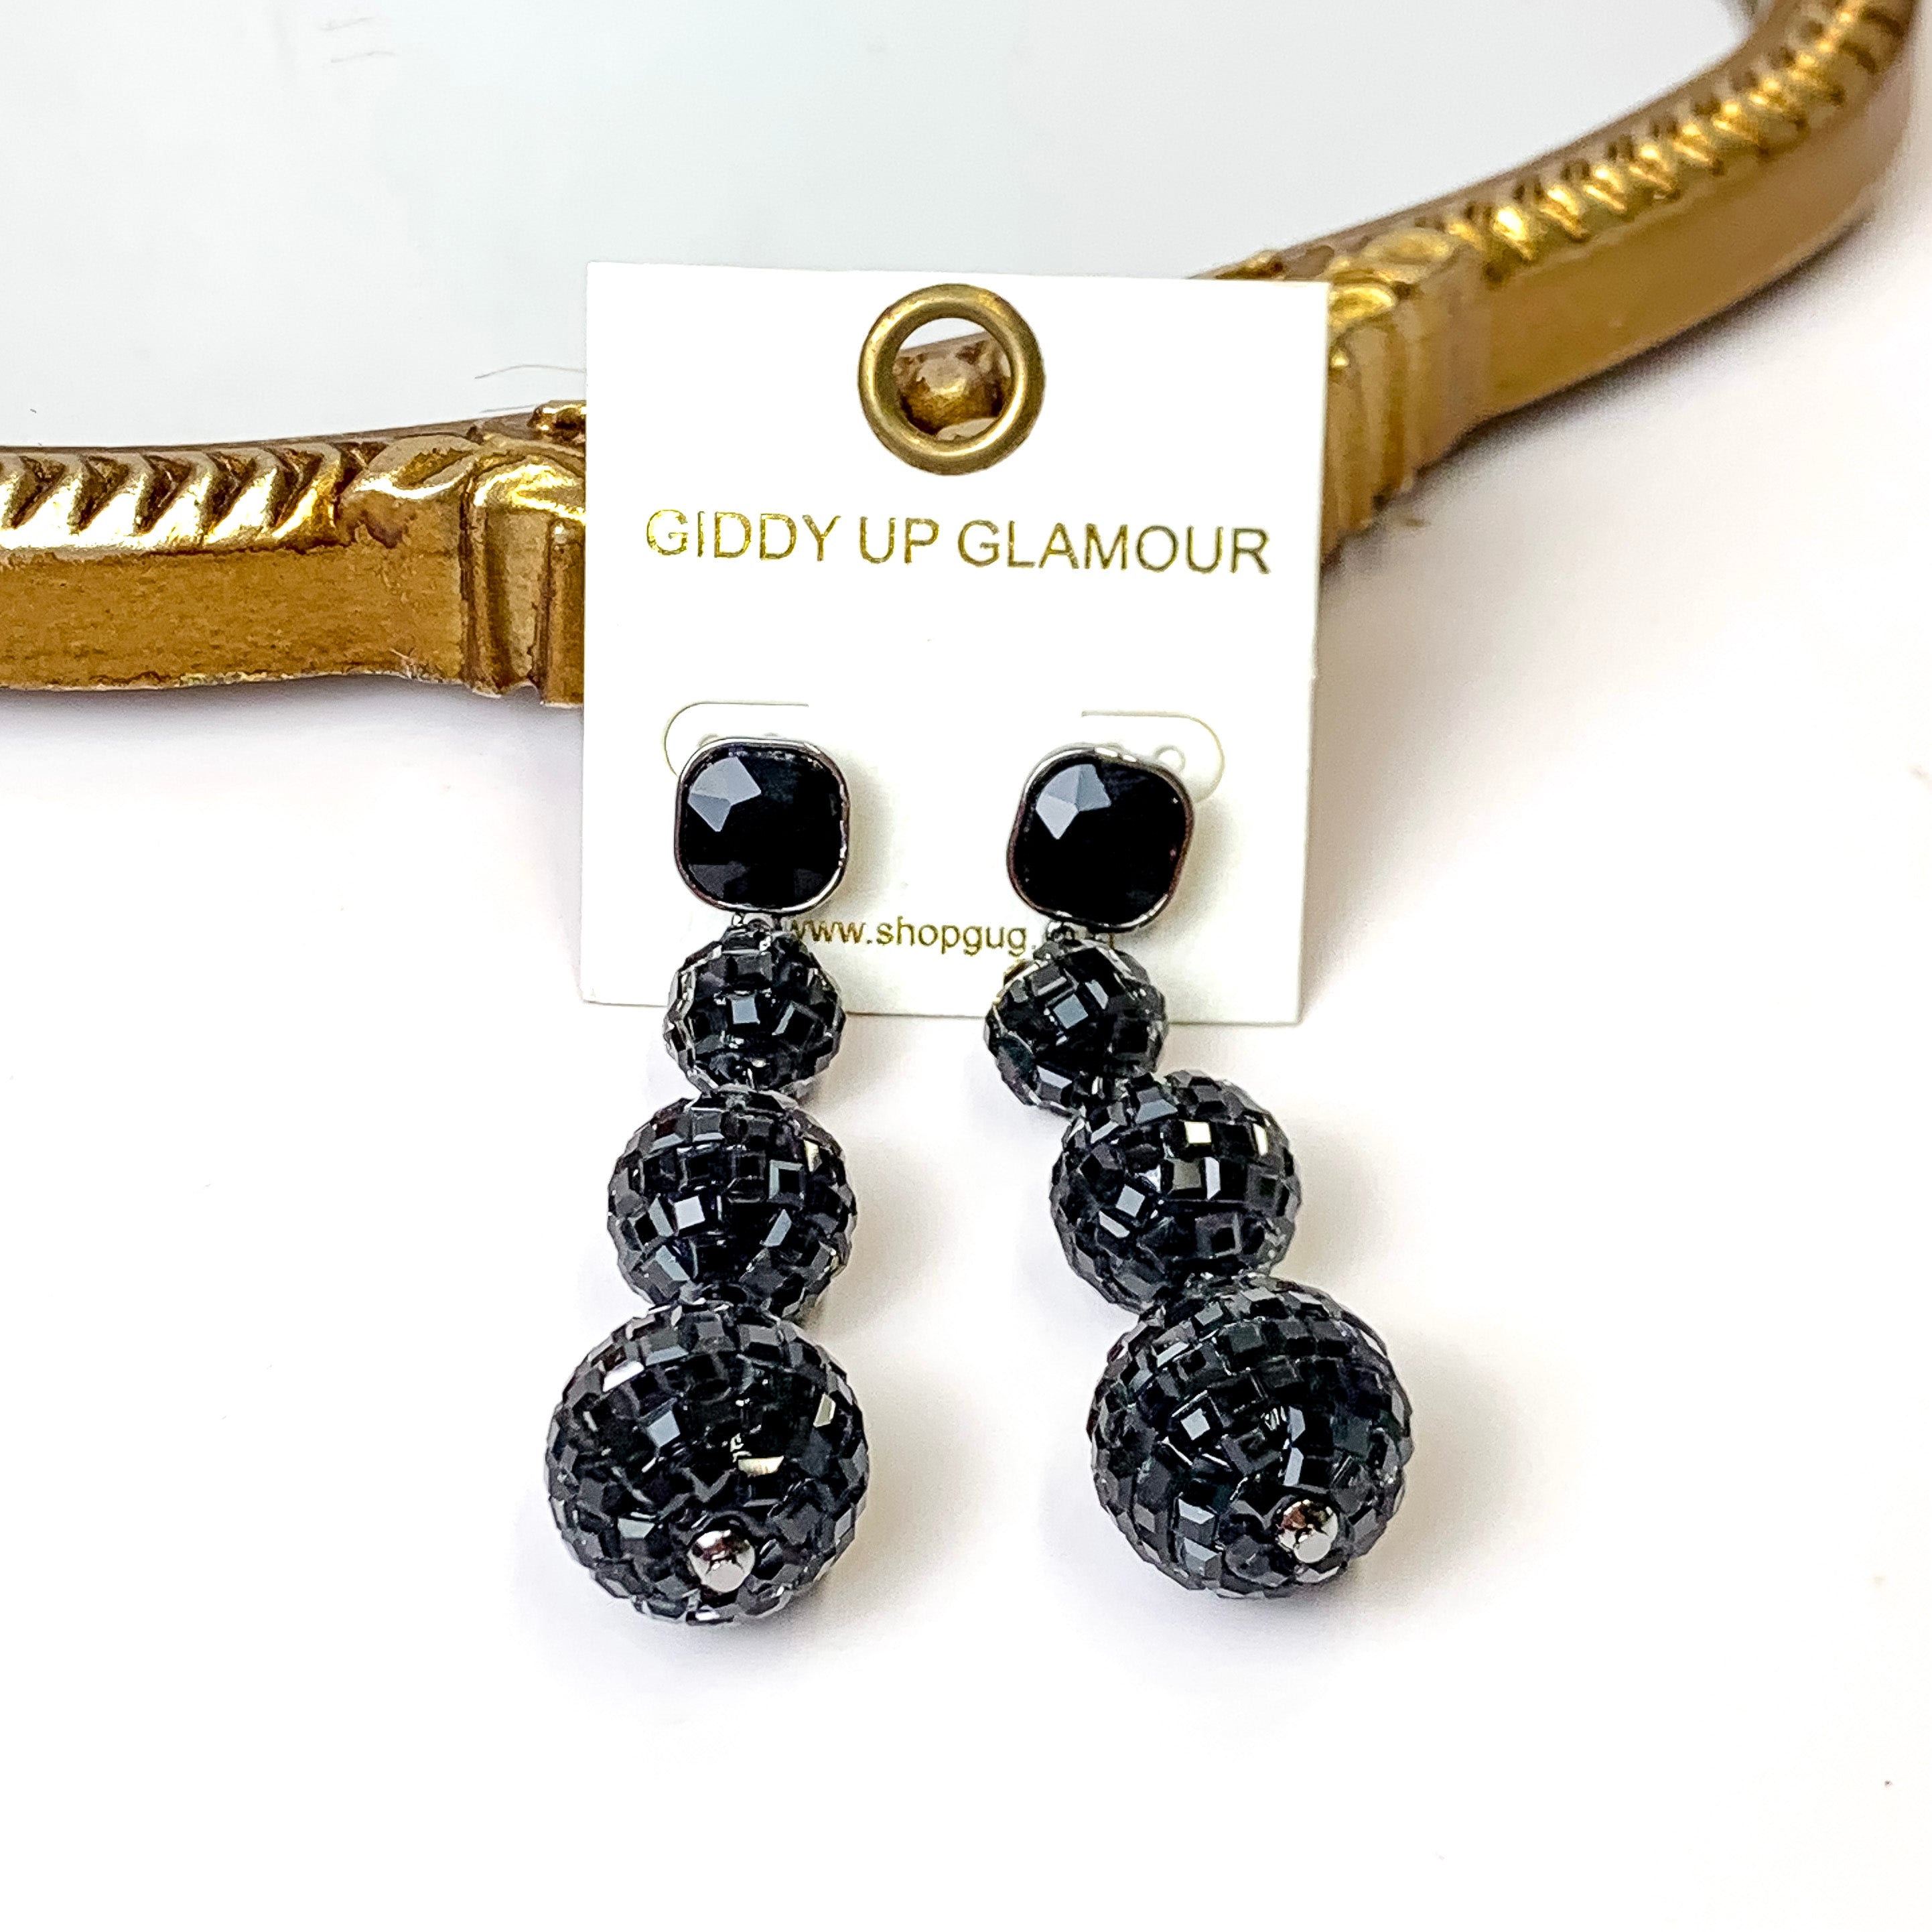 Cushion Crystal Post Disco Ball Dangle Earrings in Black - Giddy Up Glamour Boutique